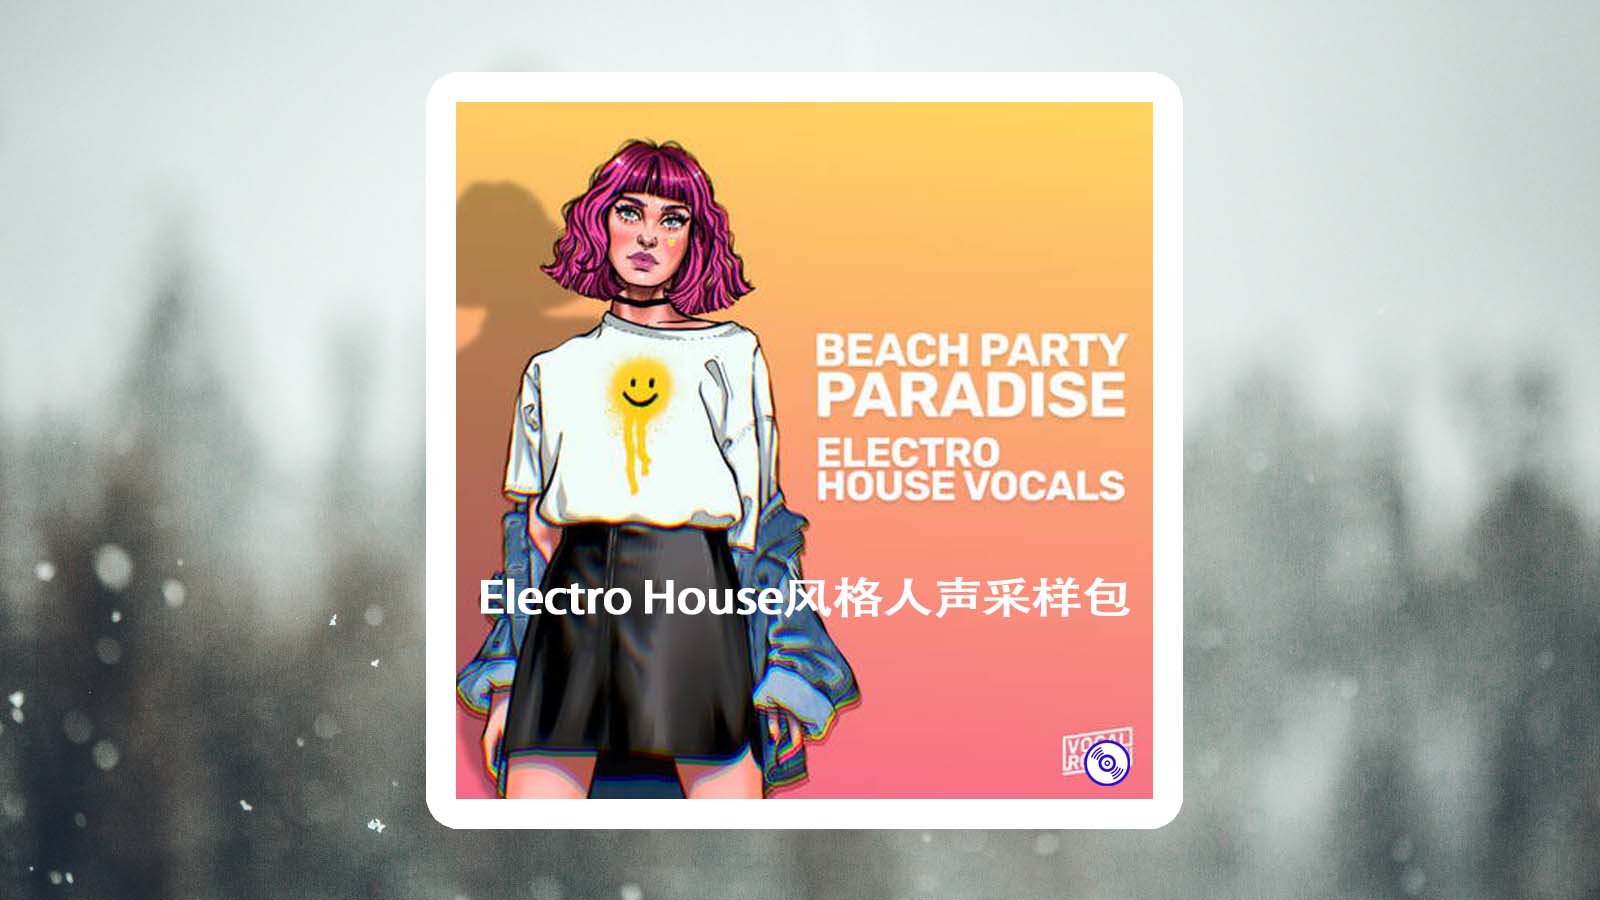 Electro House风格人声采样包下载！Electro House Vocals Sample Packs